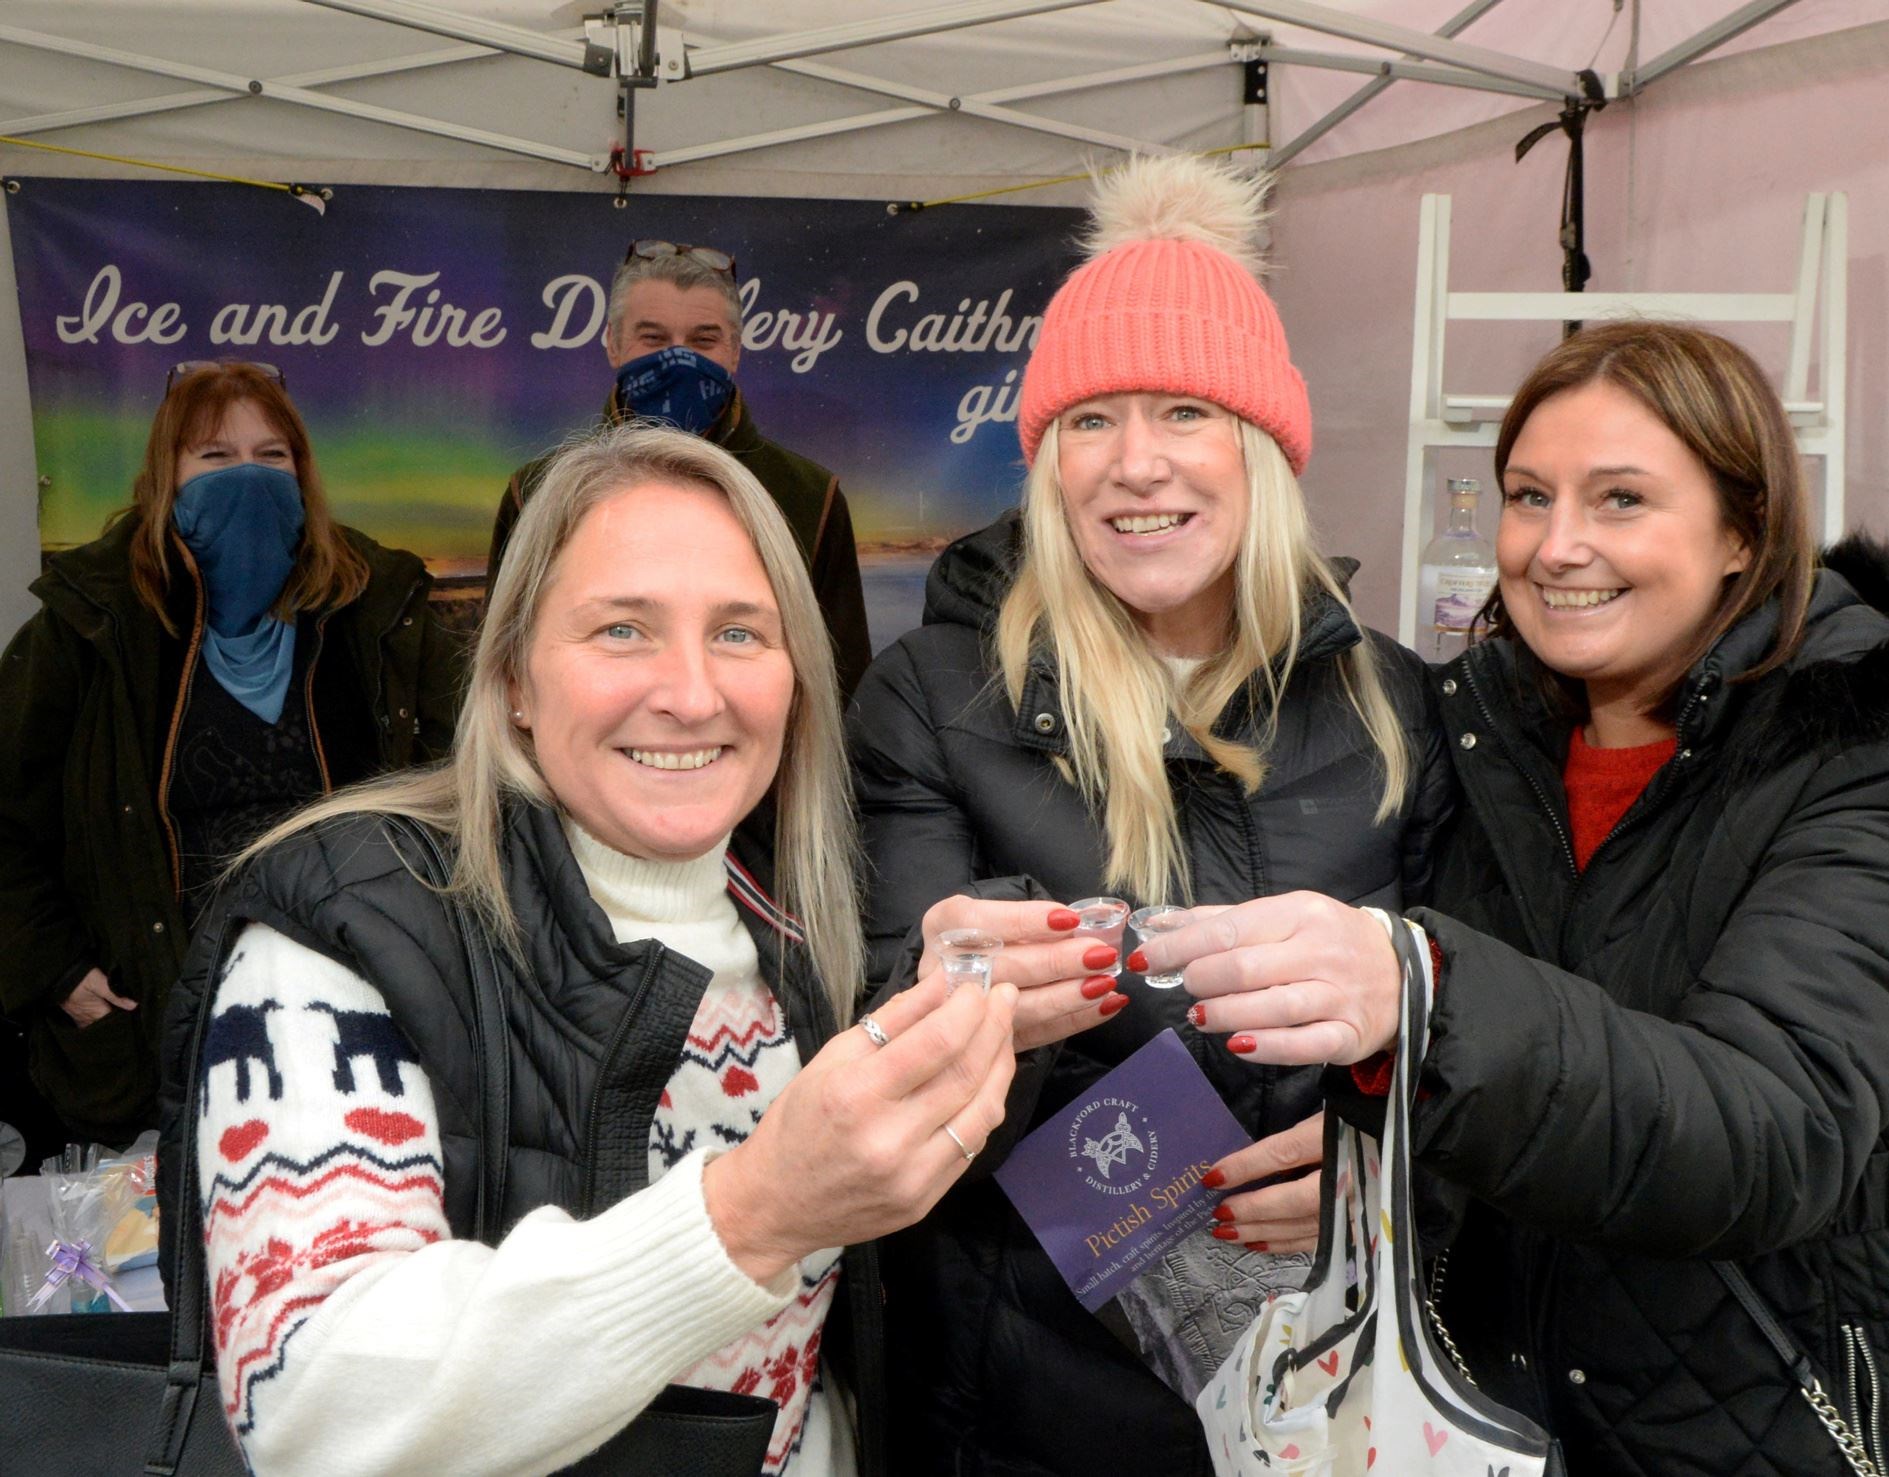 Wildwoodz Christmas Market 3 December 2021: Jacquie Black and Stephen Wright of Ice and Fire Distillery give samples to Michelle Peden, Julie Fraser and Fiona Shovelin. Picture: James Mackenzie.